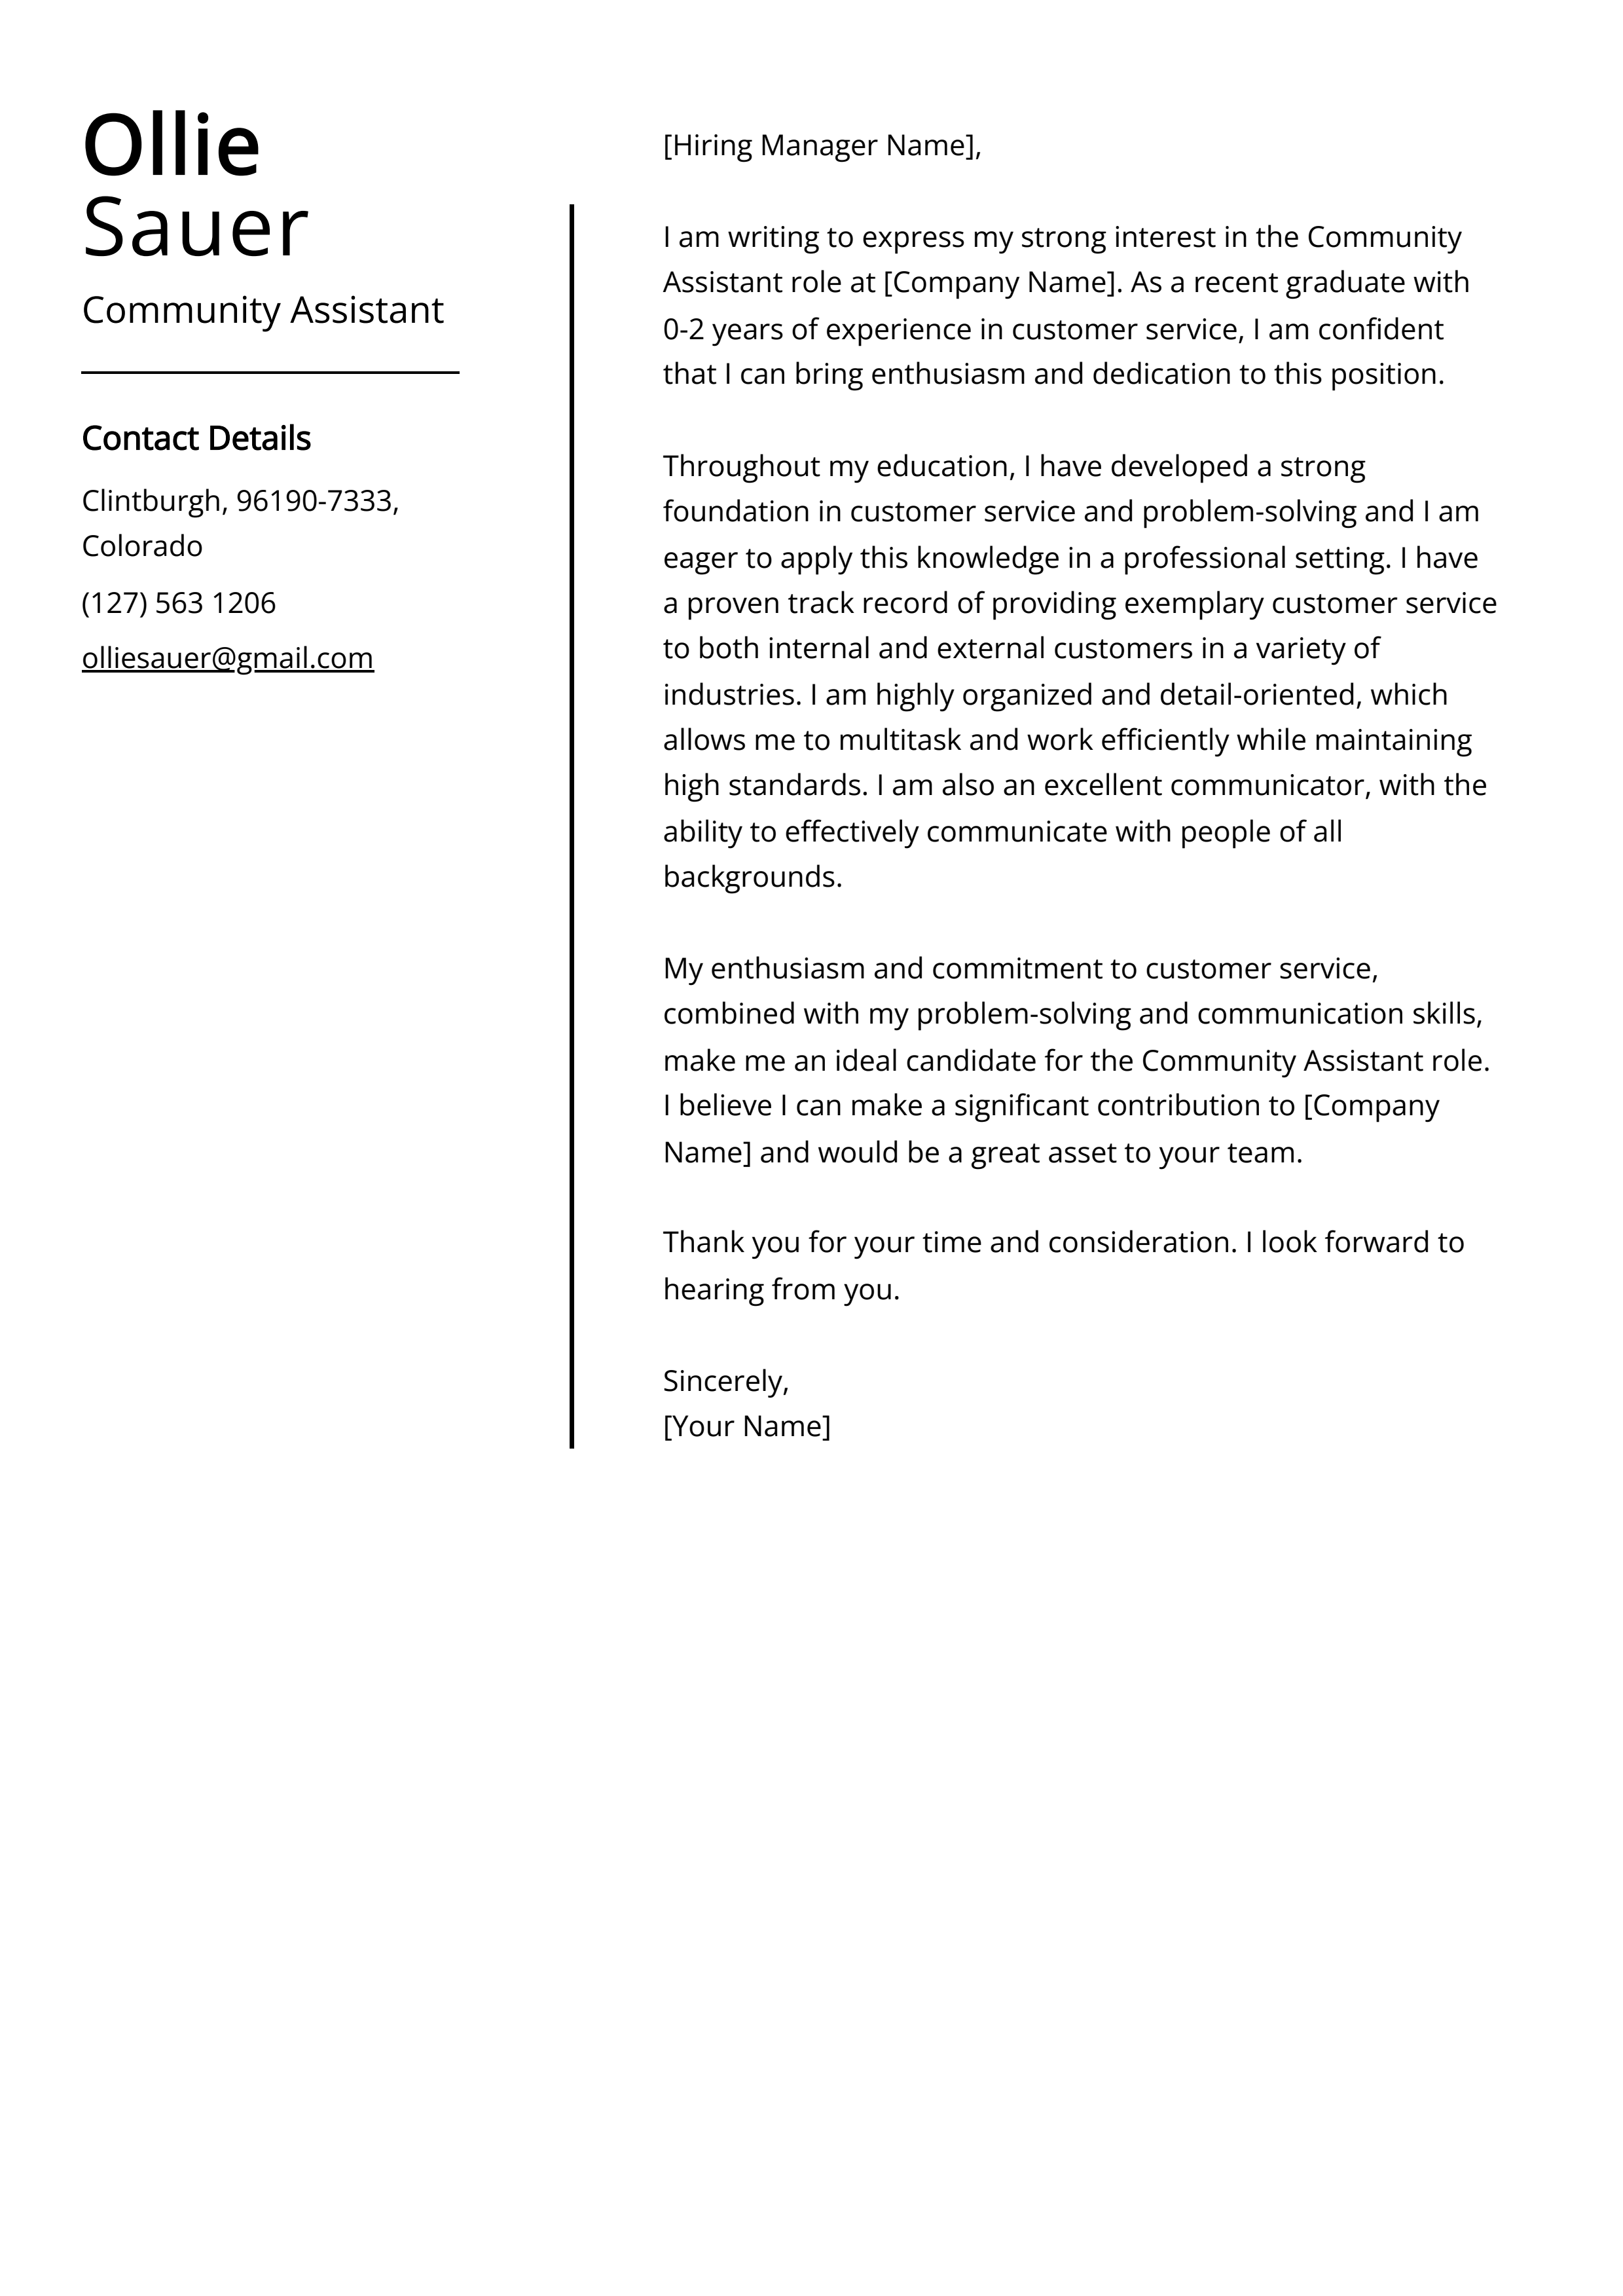 Community Assistant Cover Letter Example